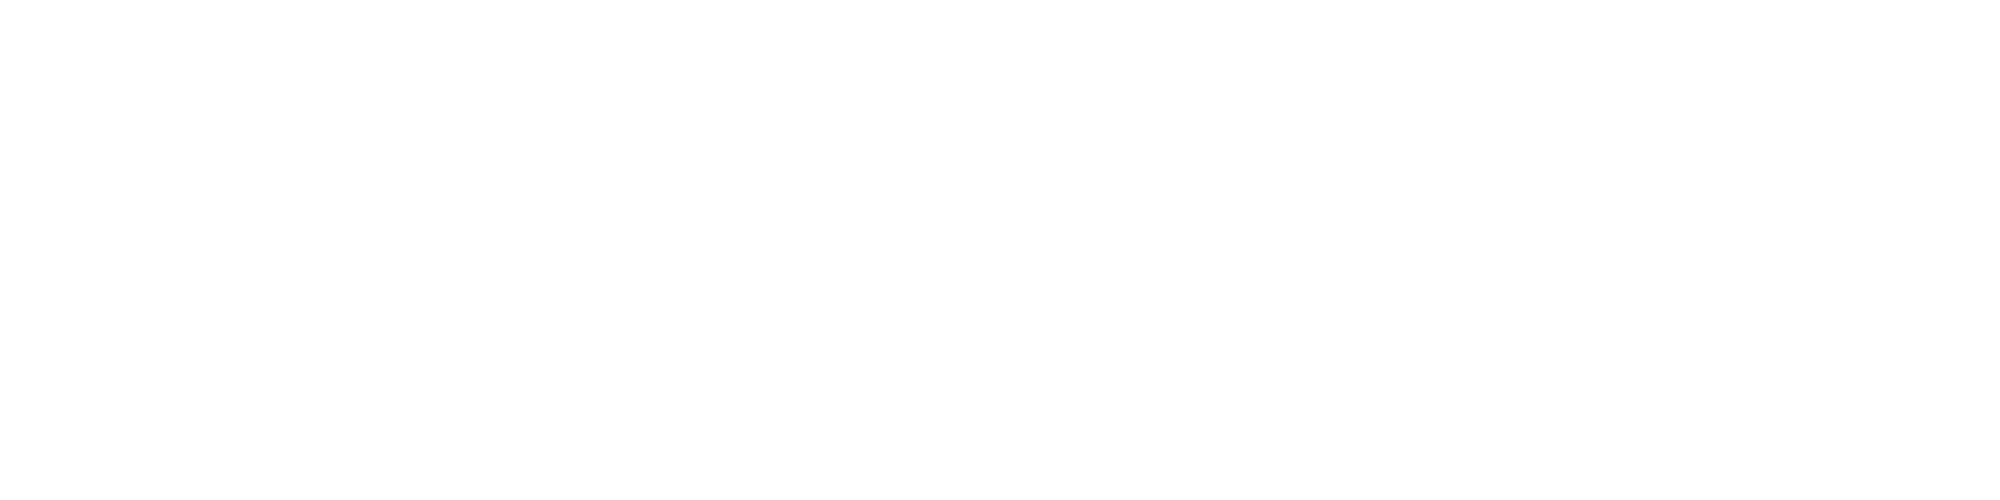 Coaching the desire to lose weight logo white 2 line